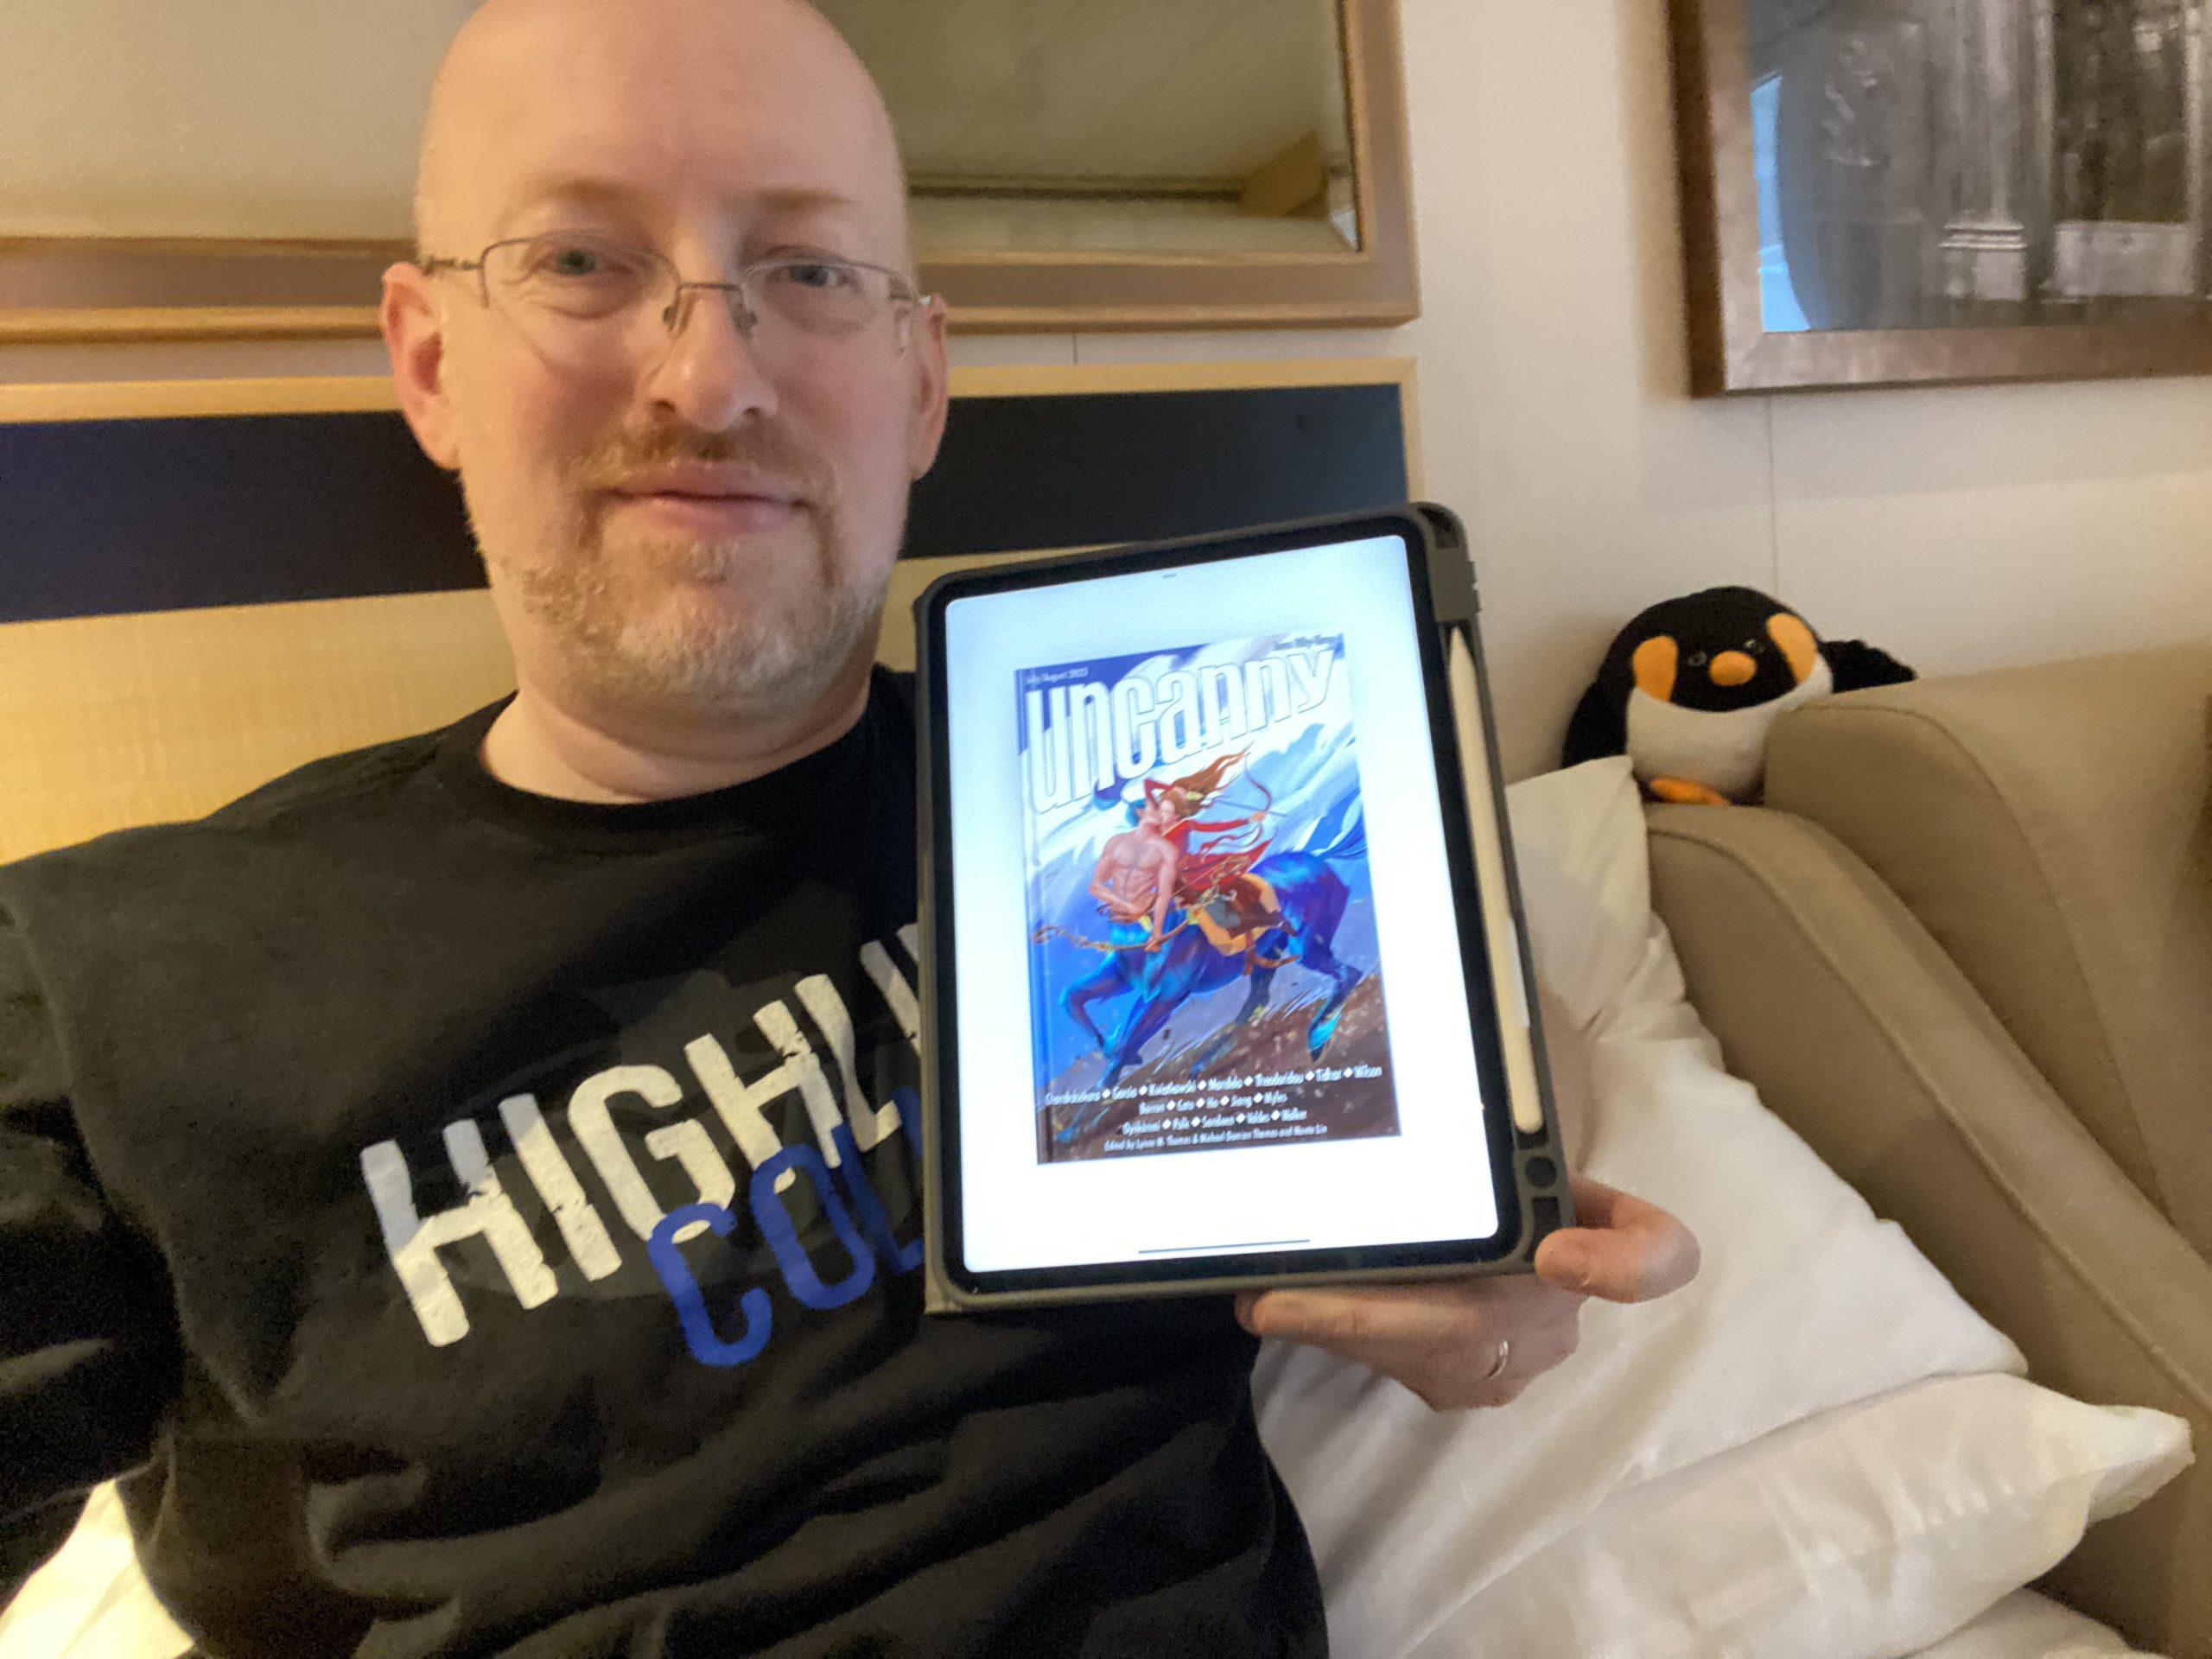 Me holding my iPad with the Uncanny Issue 53 cover shown on the screen